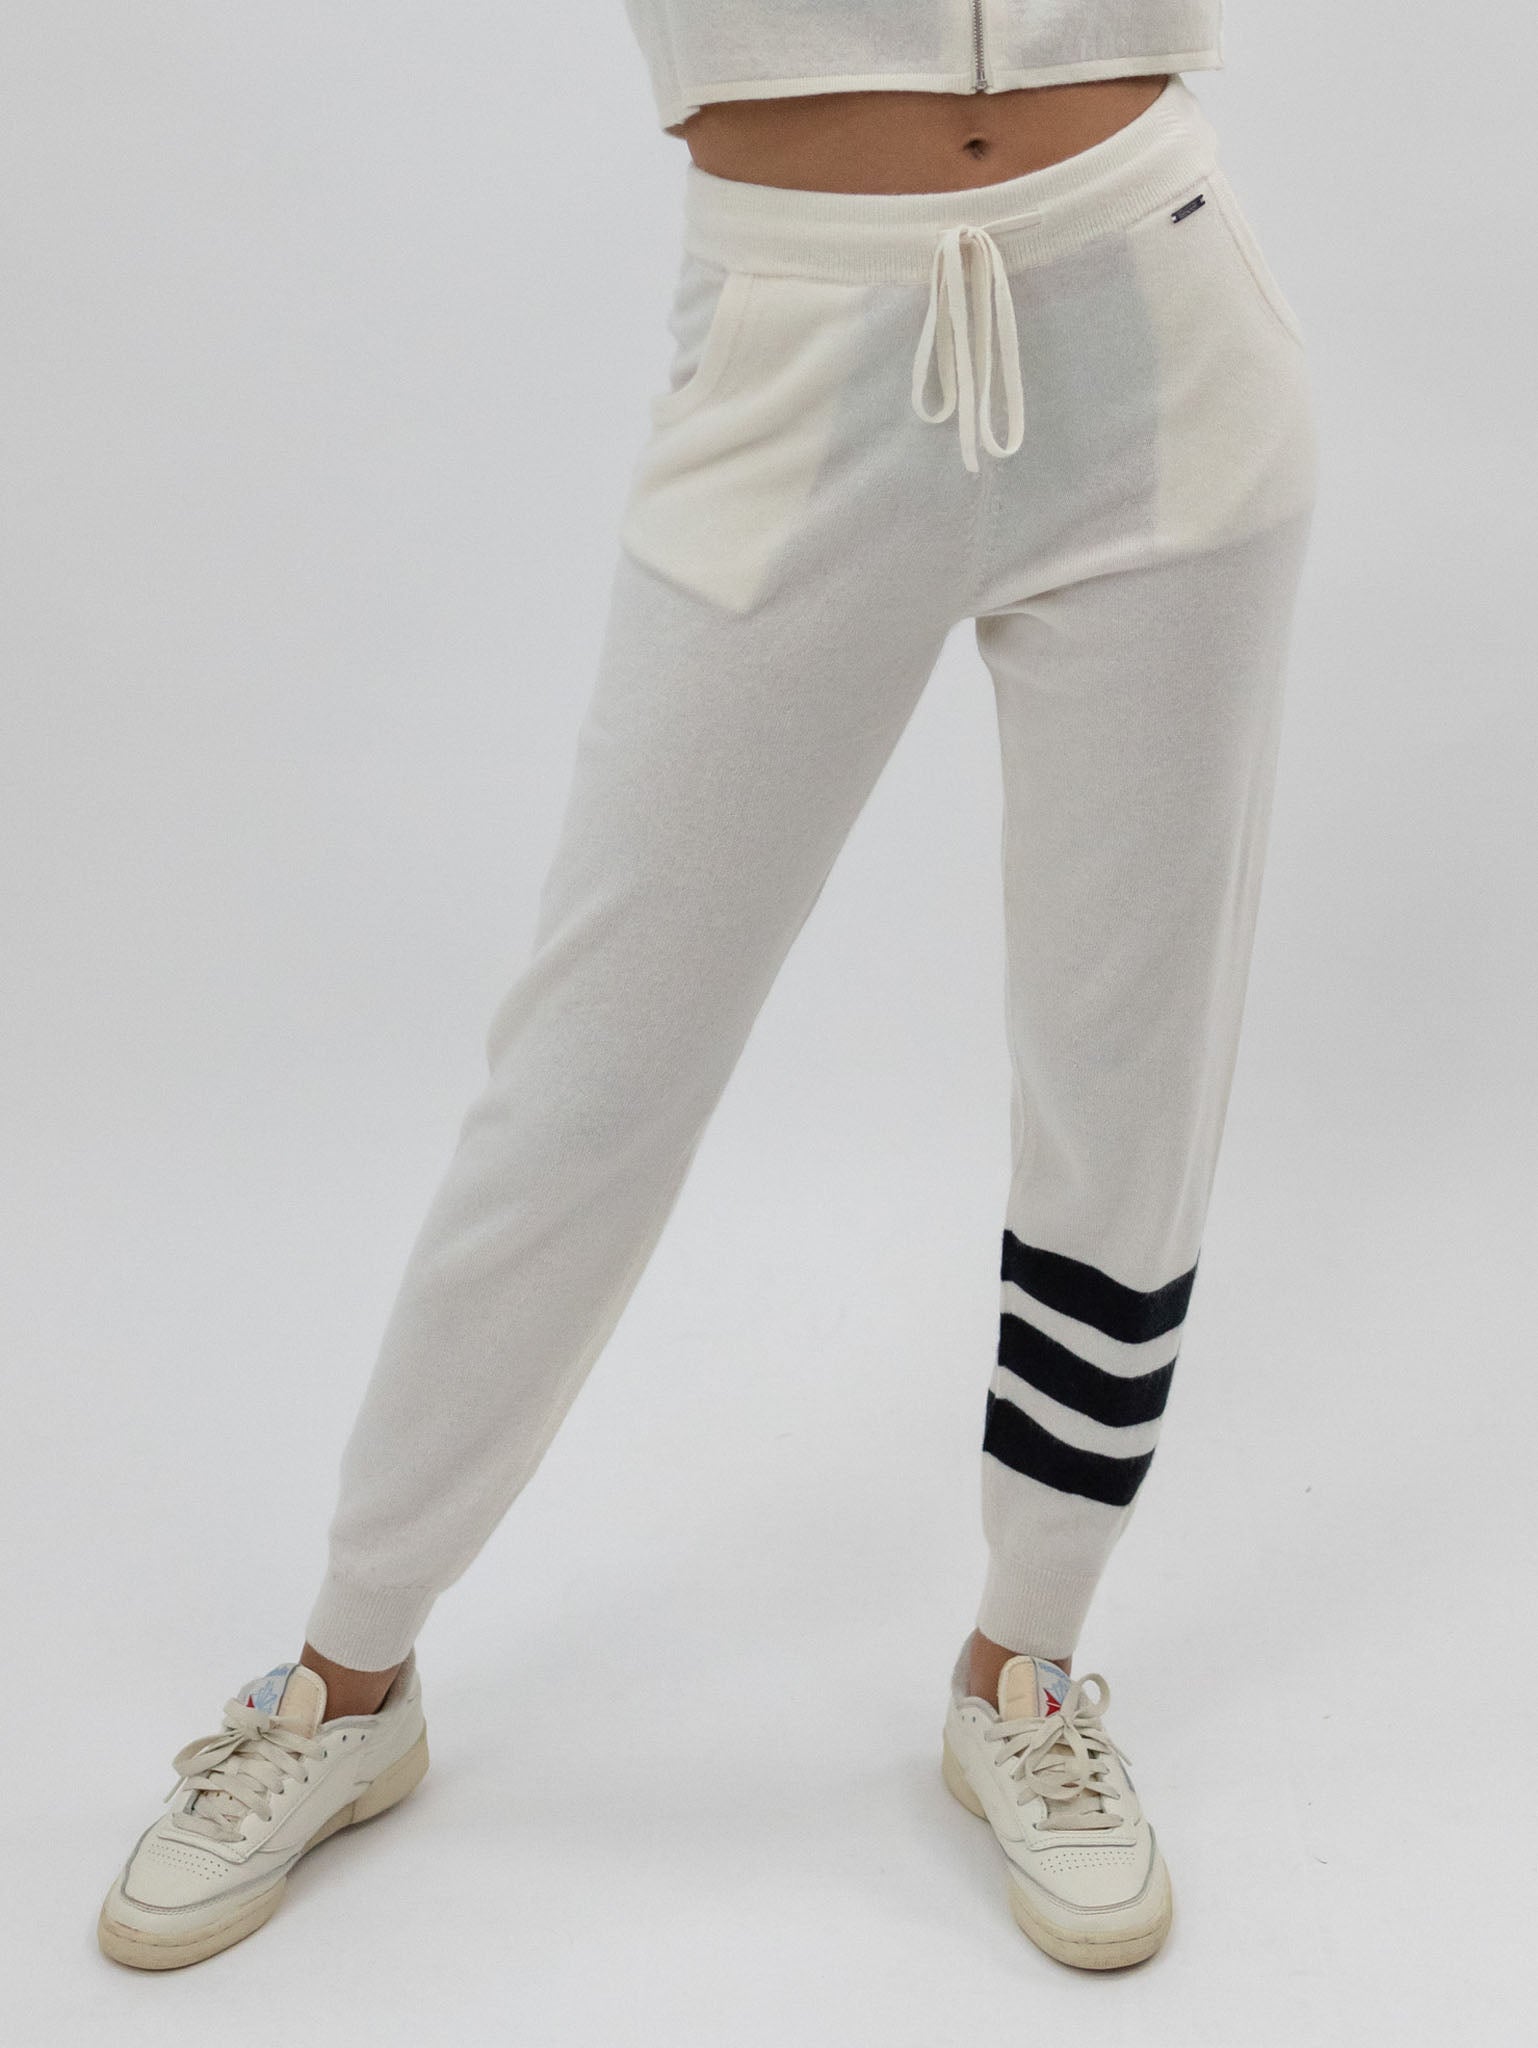 Light Weight Cashmere Women Sweatpants with Drawstring